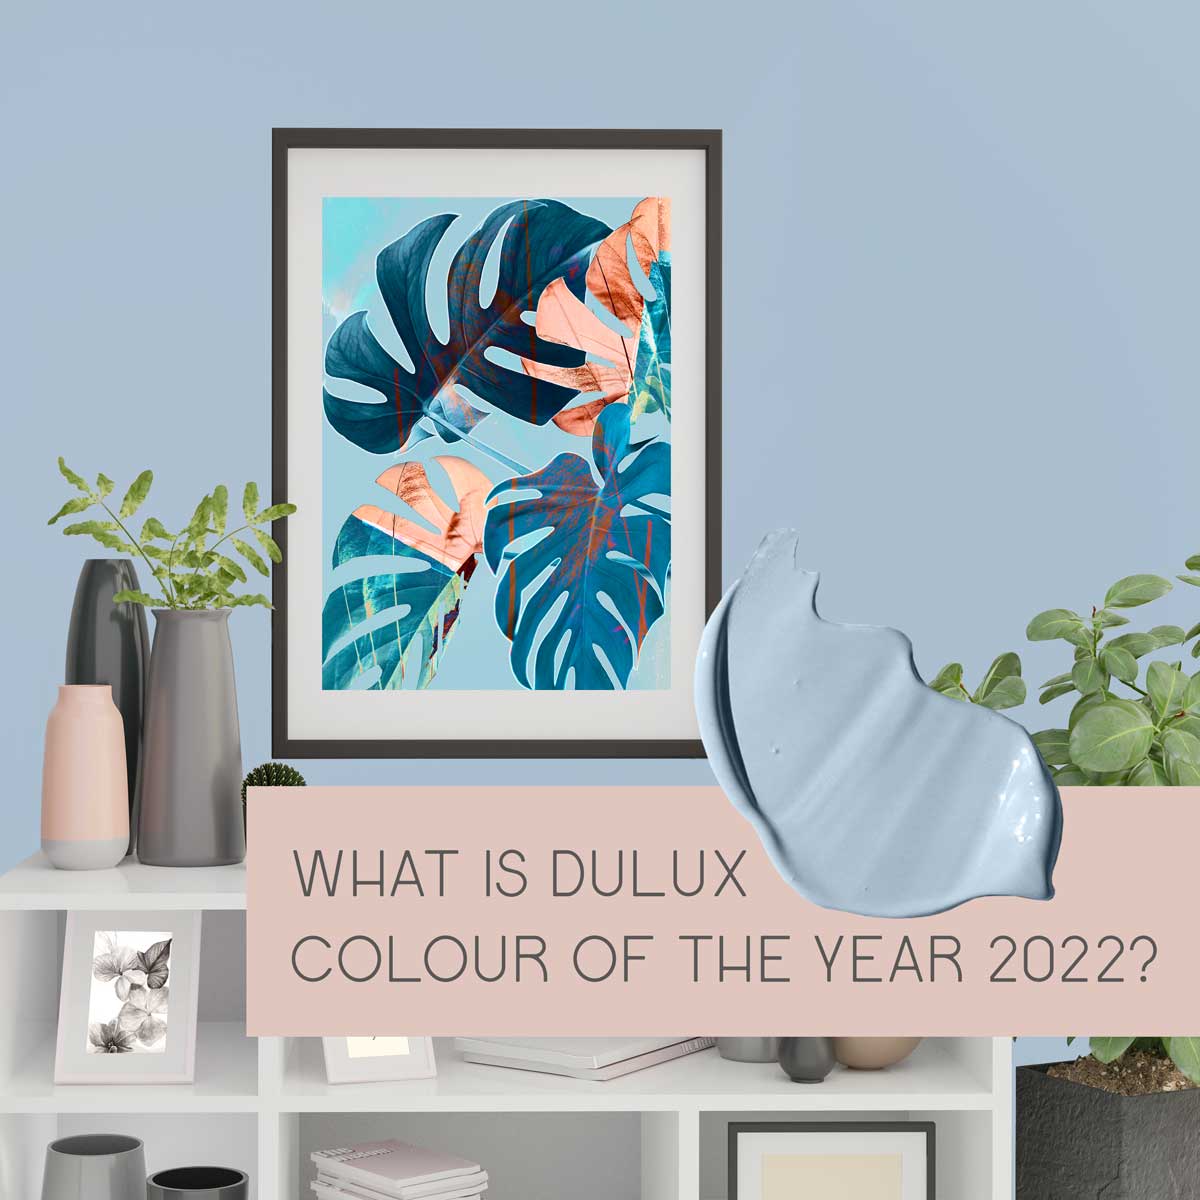 What is Dulux colour of the year 2022?